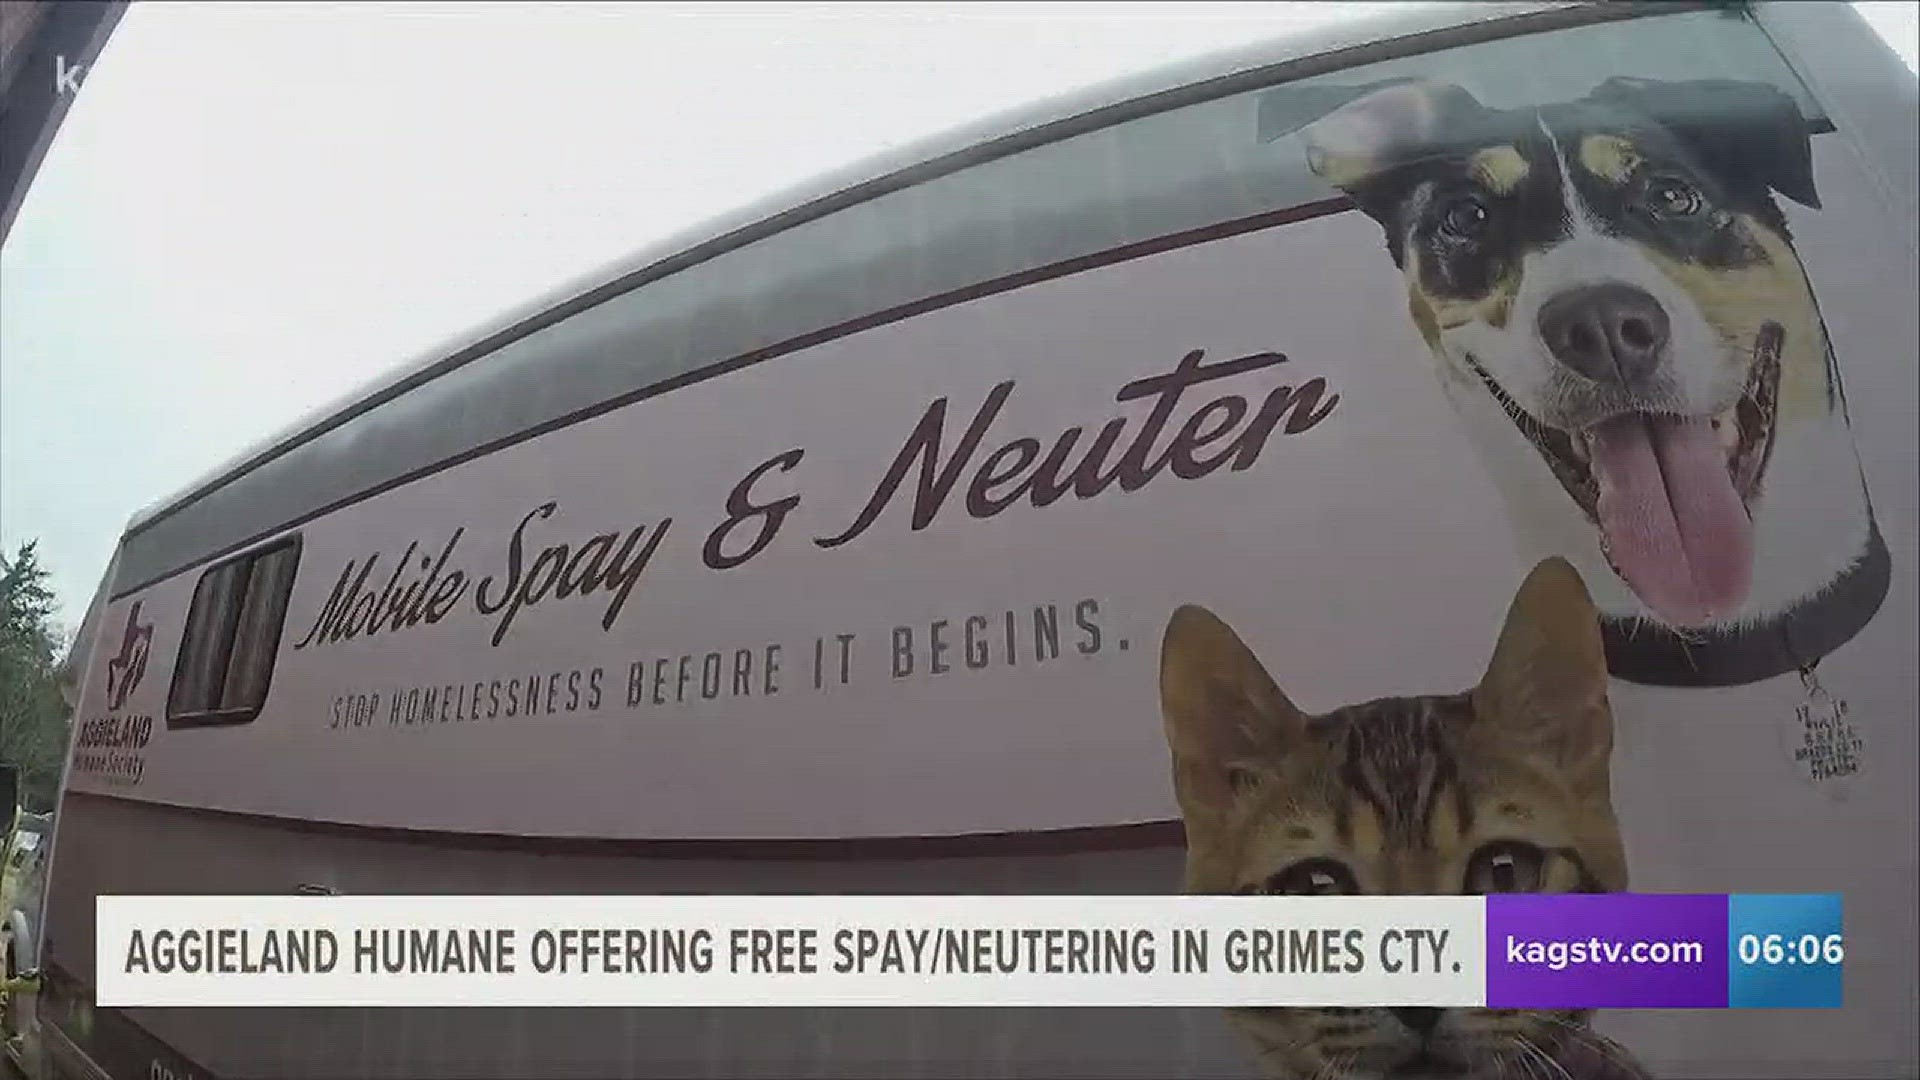 The Aggieland Humane Society's mobile spay and neuter unit will be in Grimes county this Thursday offering free services to local residents.